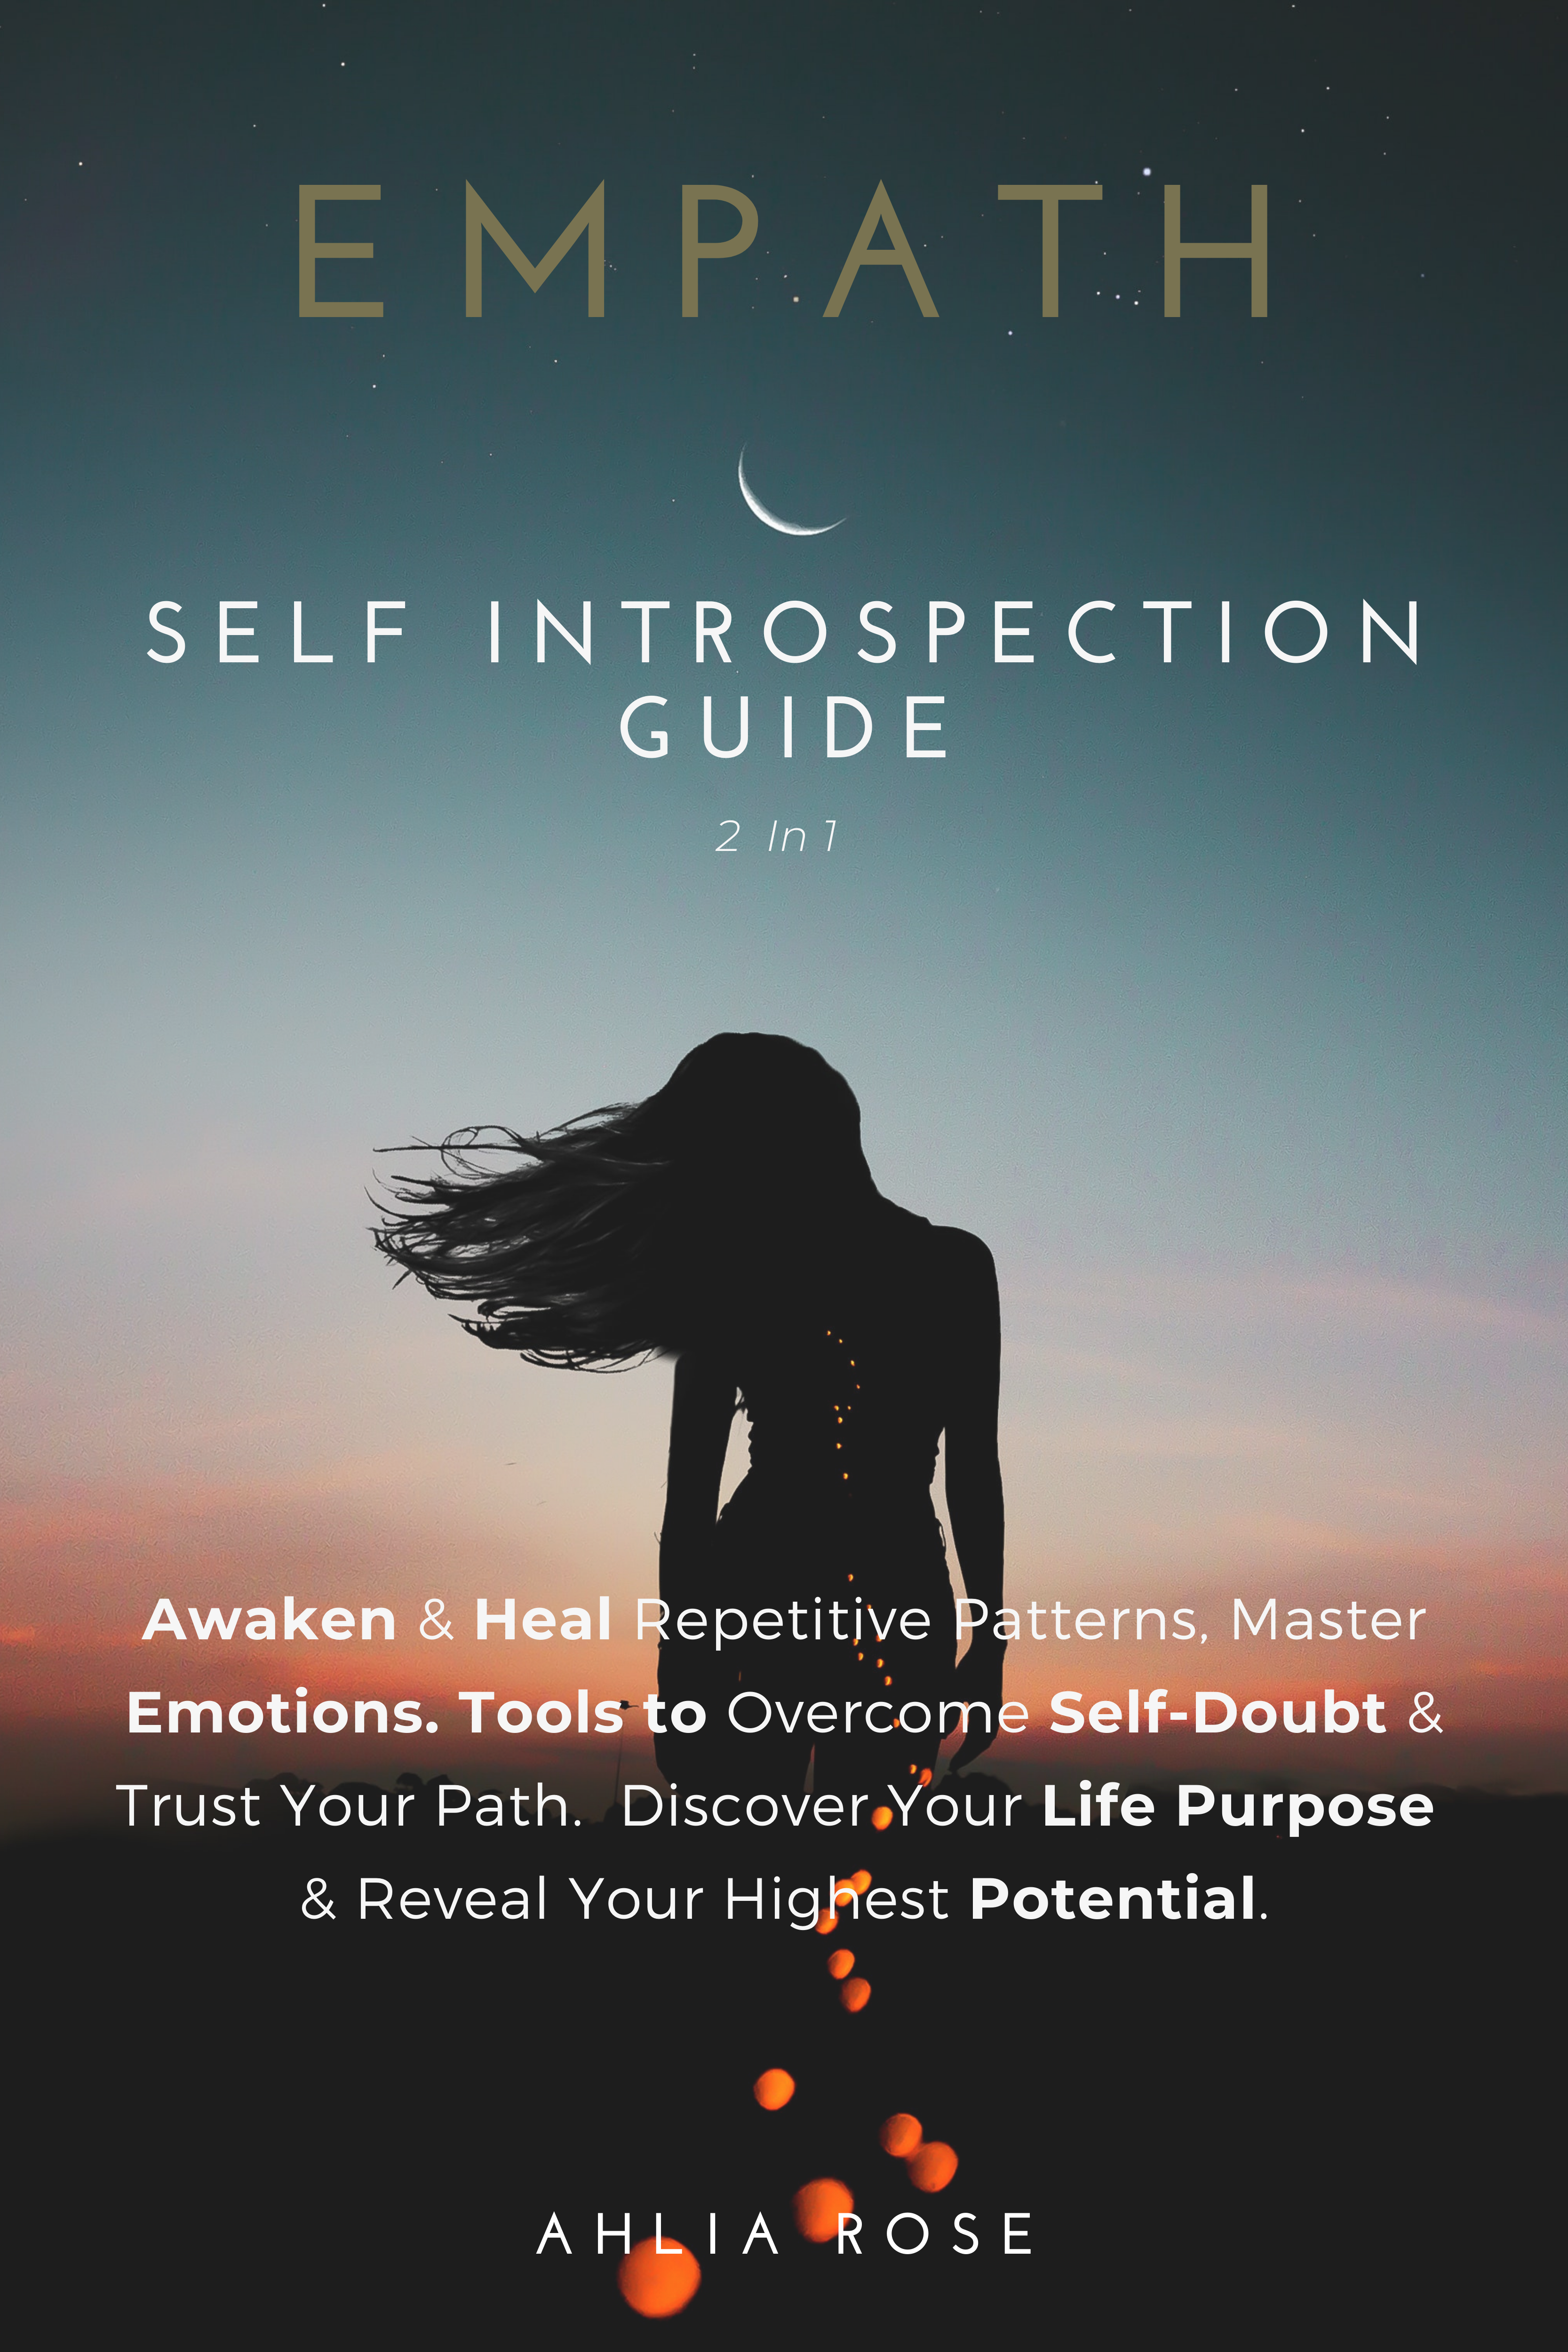 FREE: Empath Self Introspection Guide 2 in 1: Awaken & Heal Repetitive Patterns. Master Emotions, Tools to Overcome Self-Doubt & Trust Your Path. Discover Your Life Purpose & Reach Your Highest Potential by Ahlia Rose